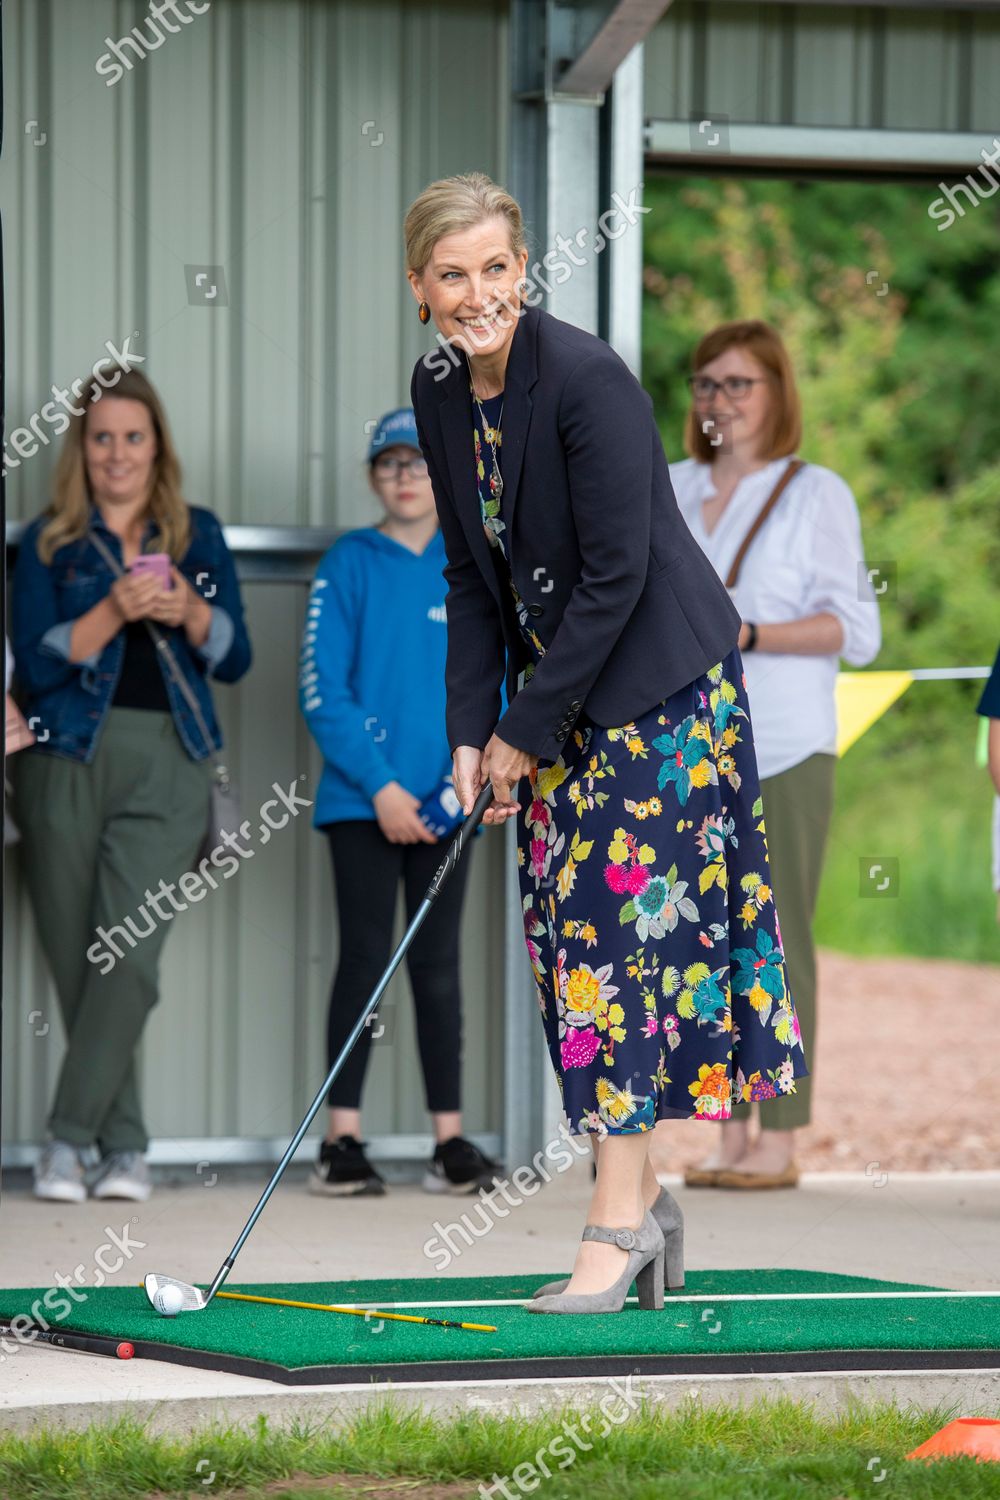 CASA REAL BRITÁNICA - Página 76 Prince-edward-and-sophie-countess-of-wessex-visit-to-forfar-golf-club-scotland-uk-shutterstock-editorial-12172307bl